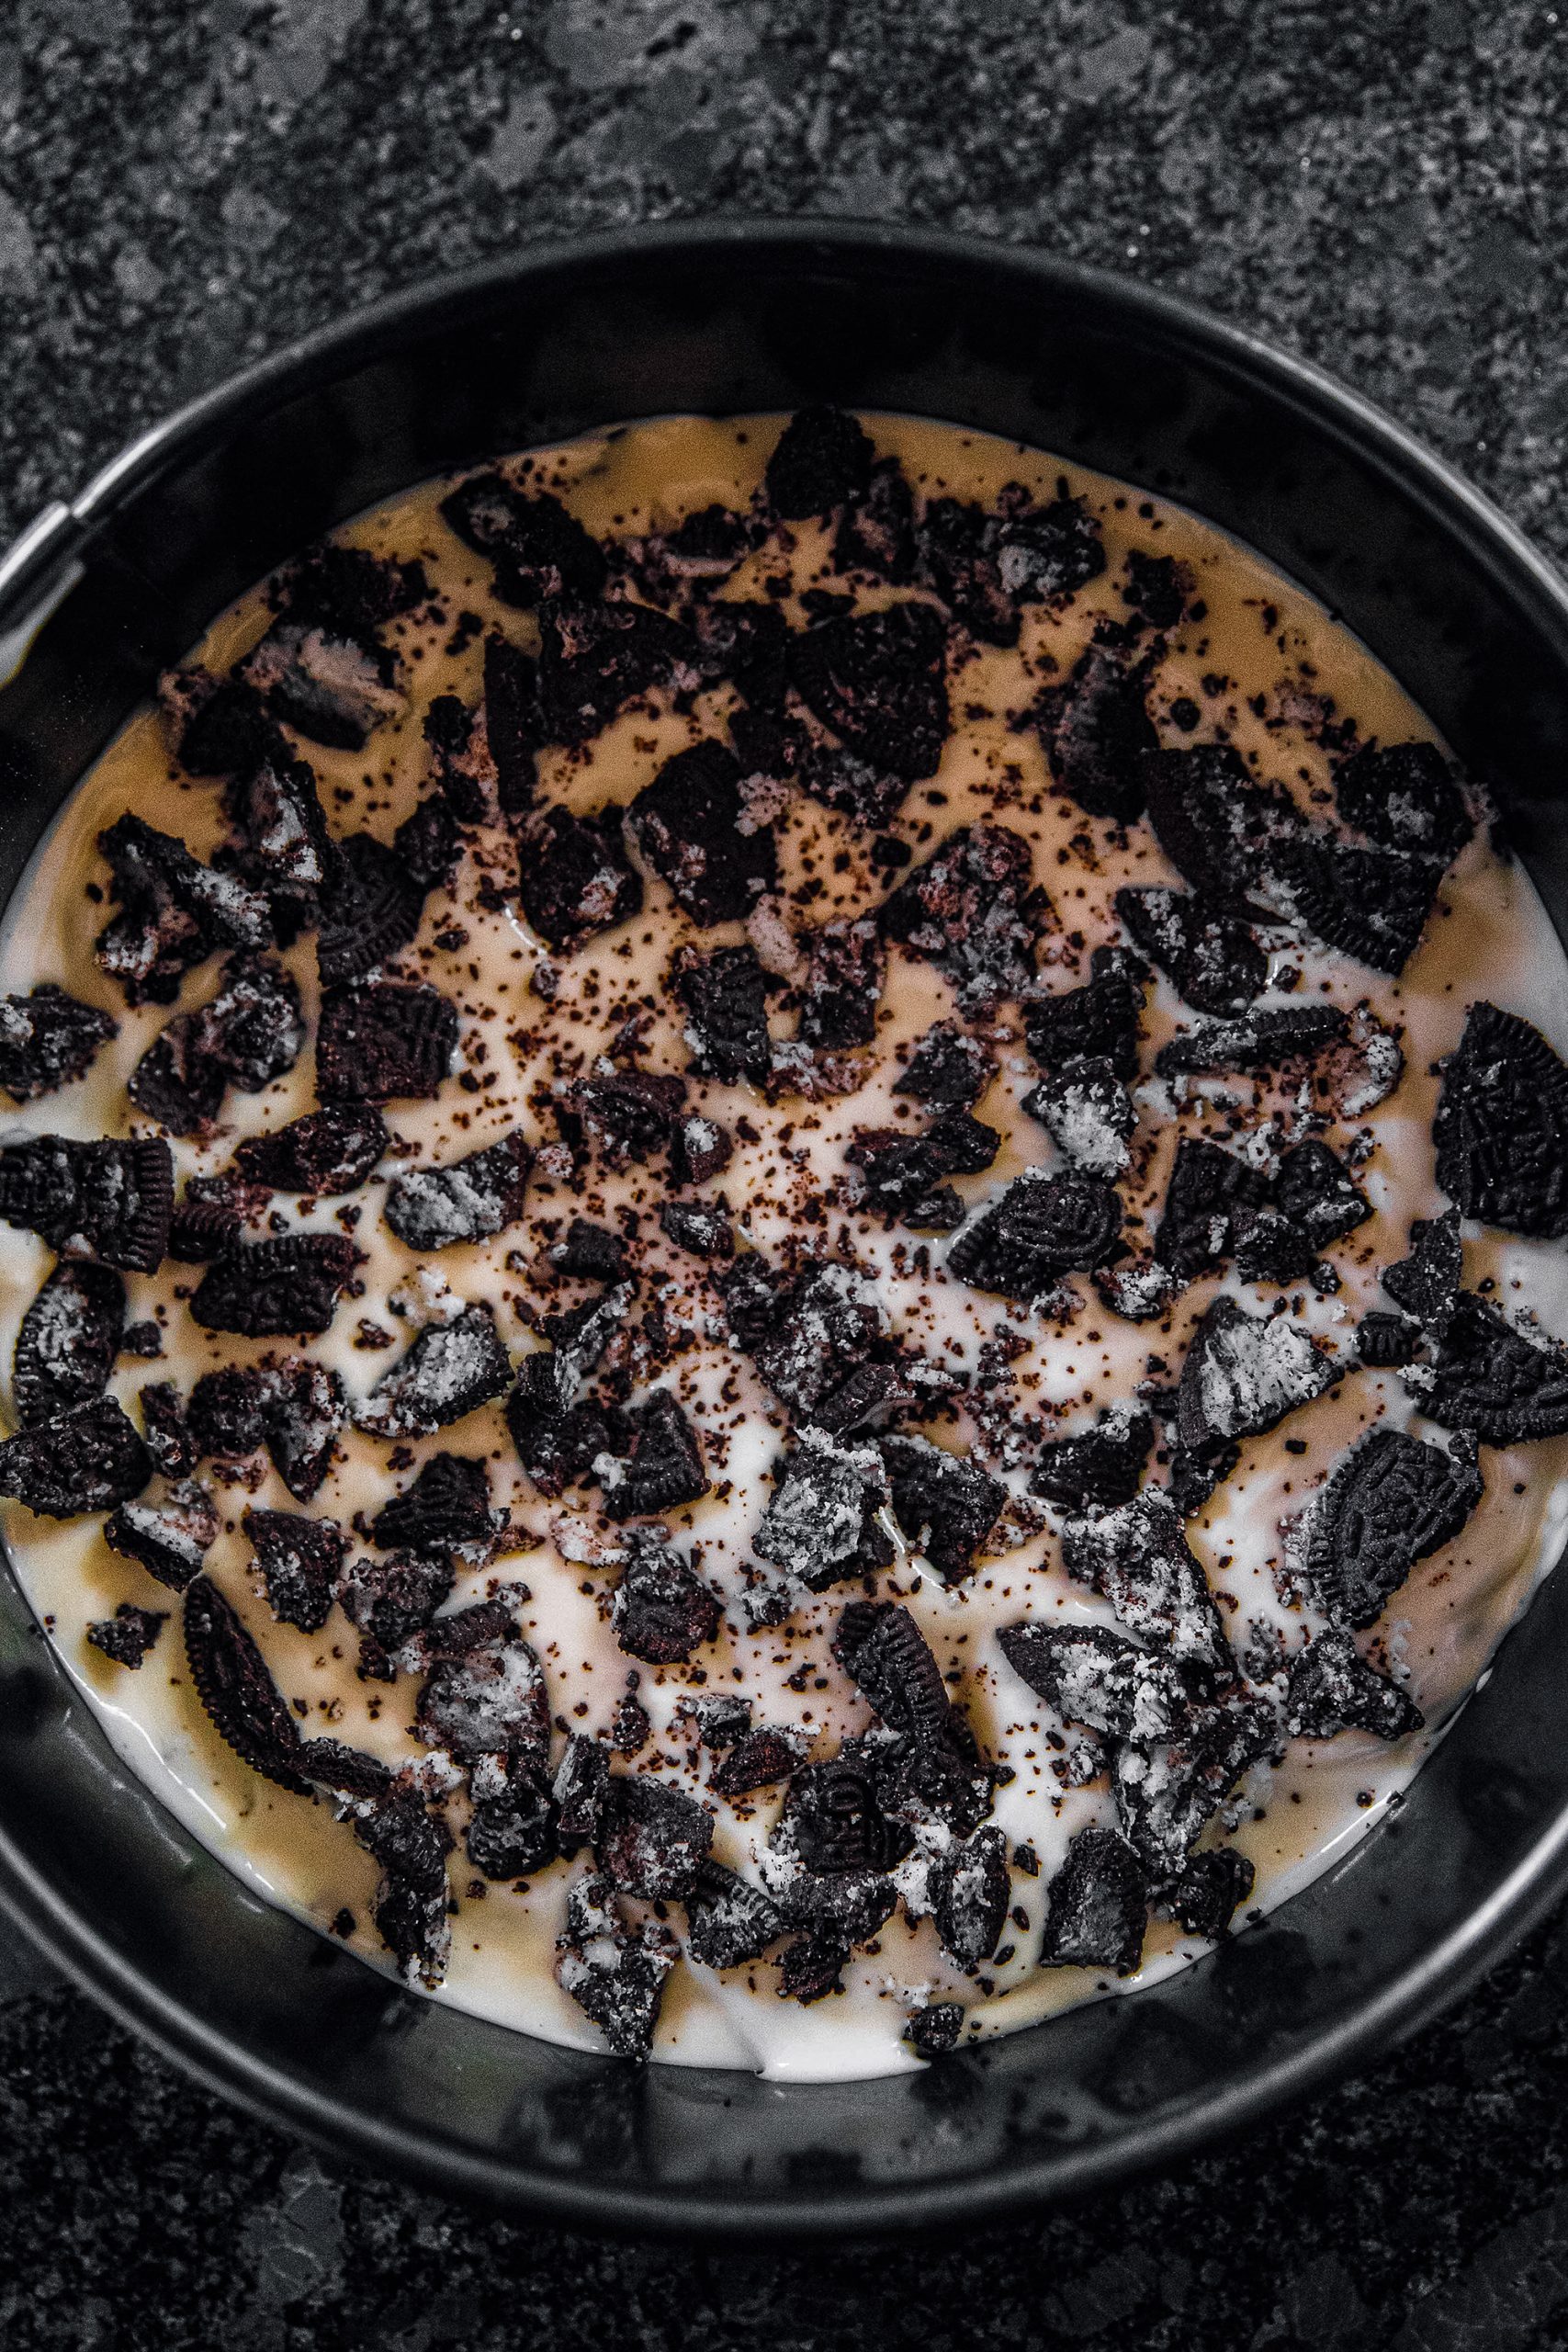 Spread ⅓ of the batter into the pan, spread 1 ½ cups of the cookie pieces